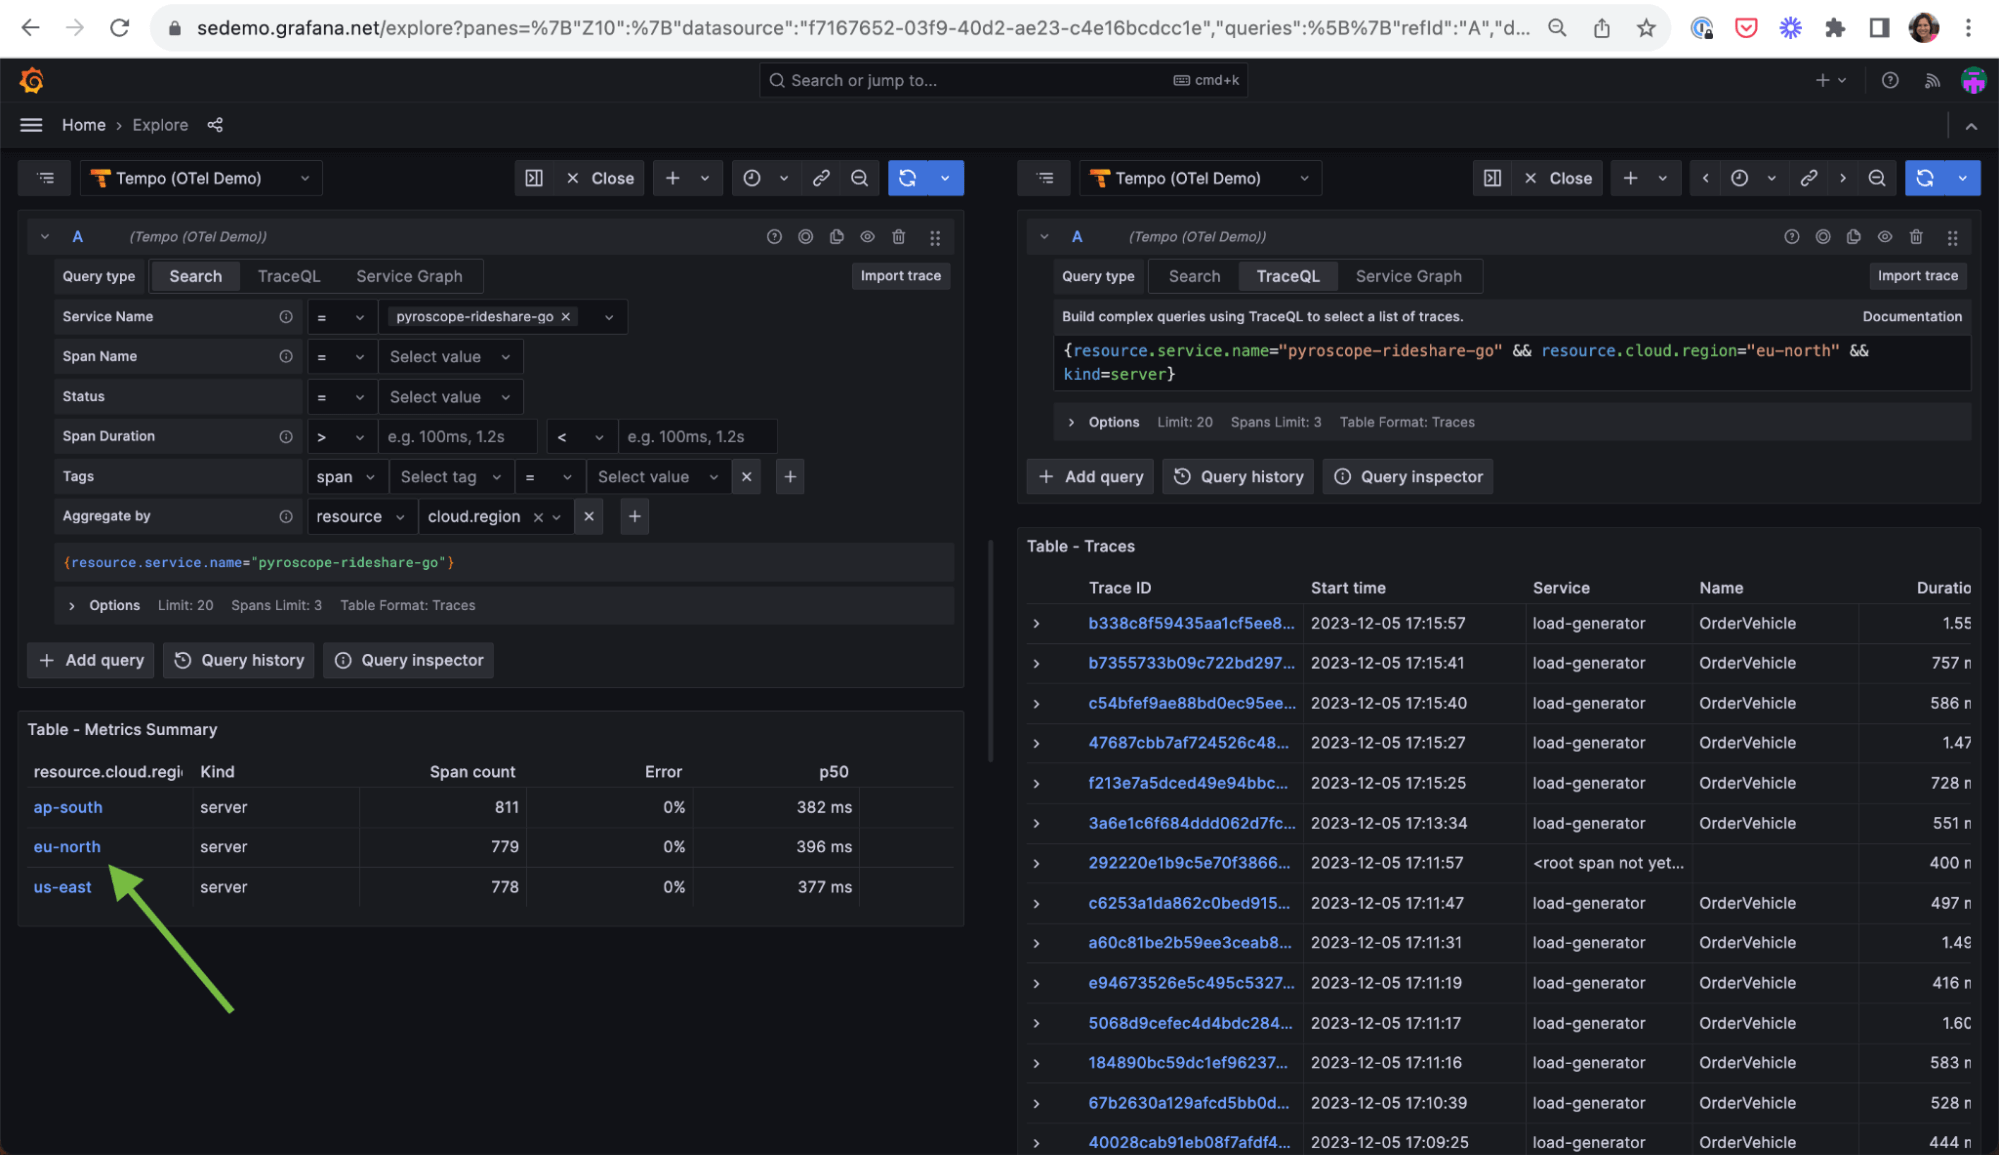 A metrics summary view from an ad hoc query in Grafana Tempo, shown in a Grafana dashboard, with eu-north split screen